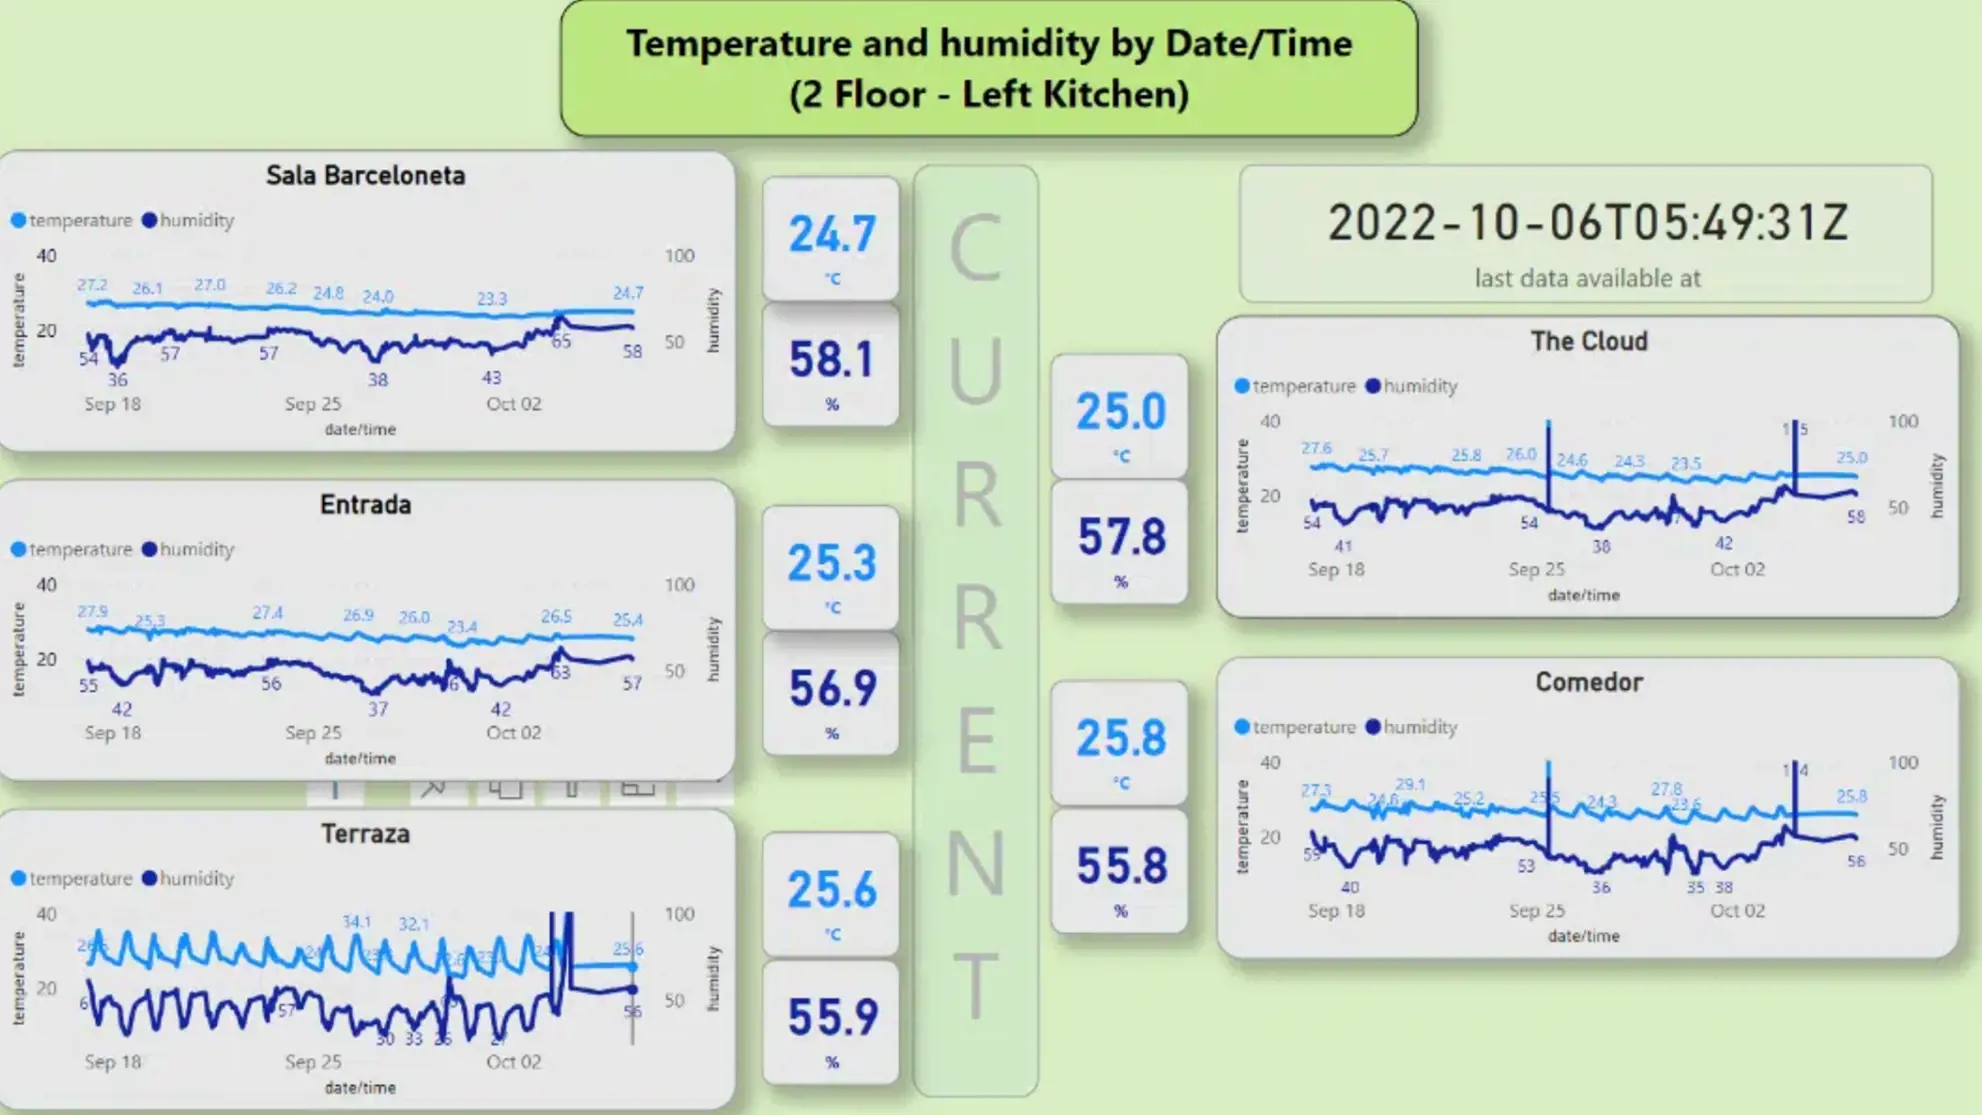 Dashboard of temperature and humidity by Date/Time